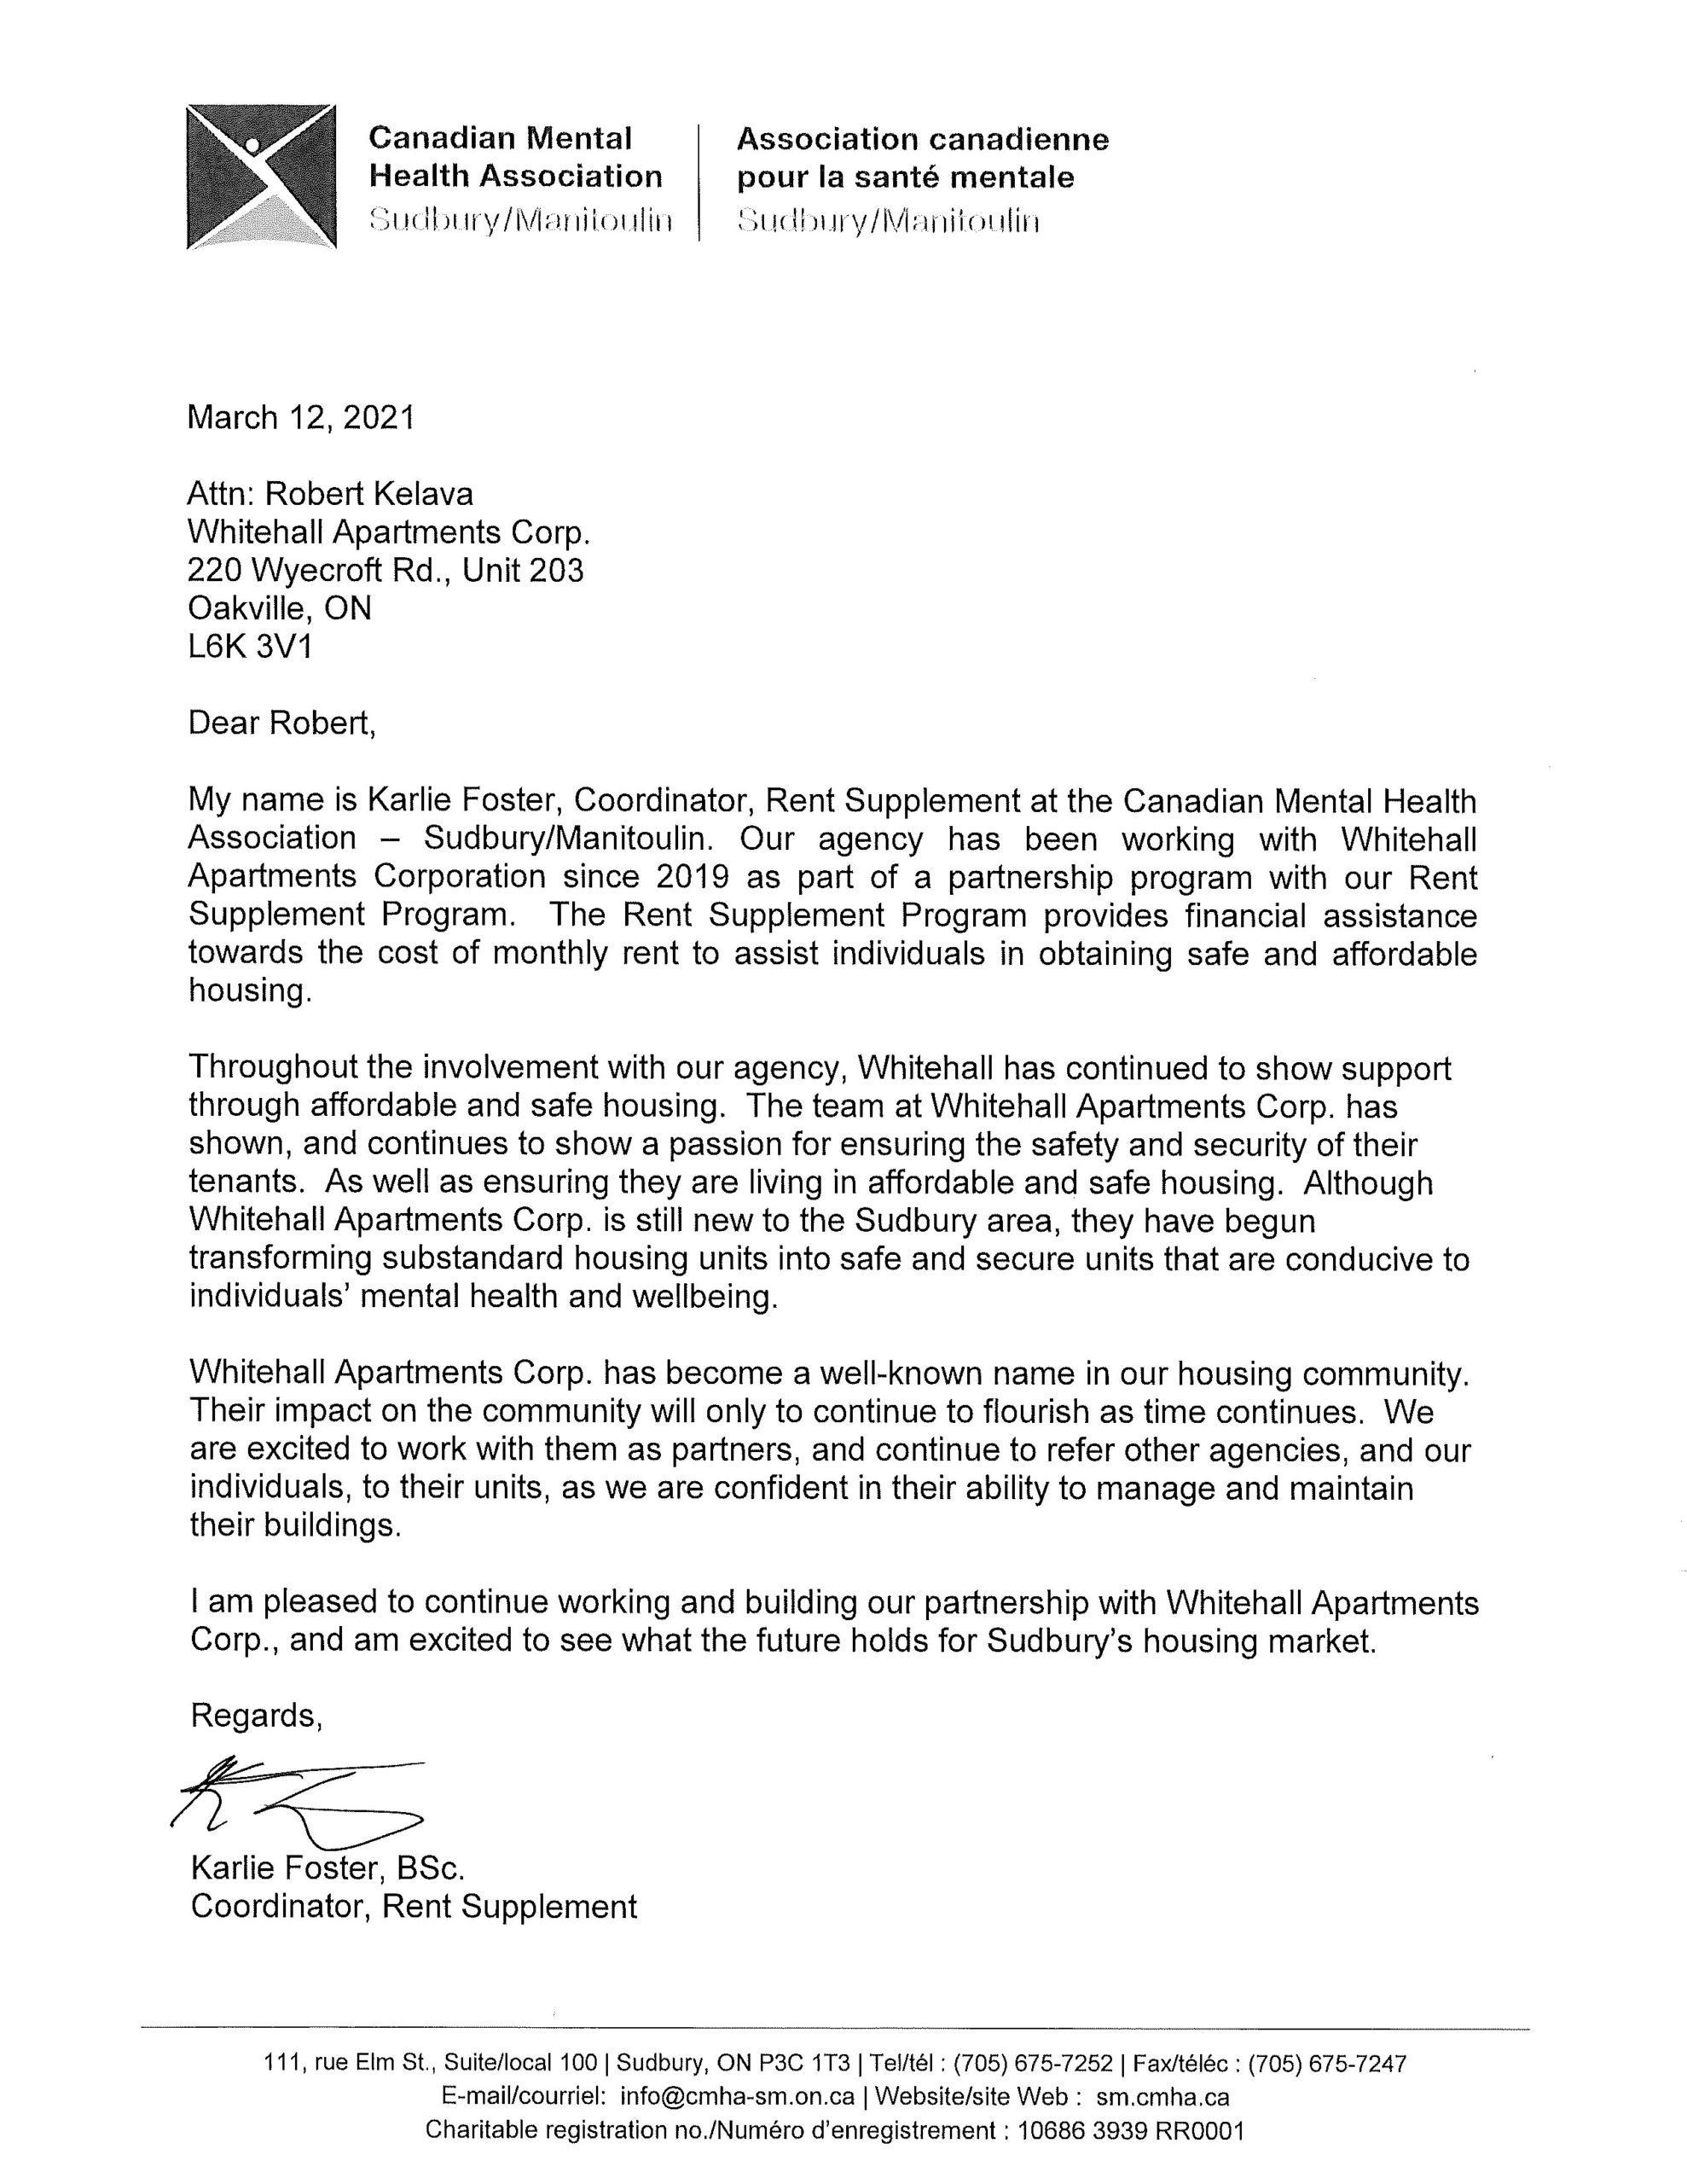 Whitehall Apartments - CMHA SM Support Letter copy